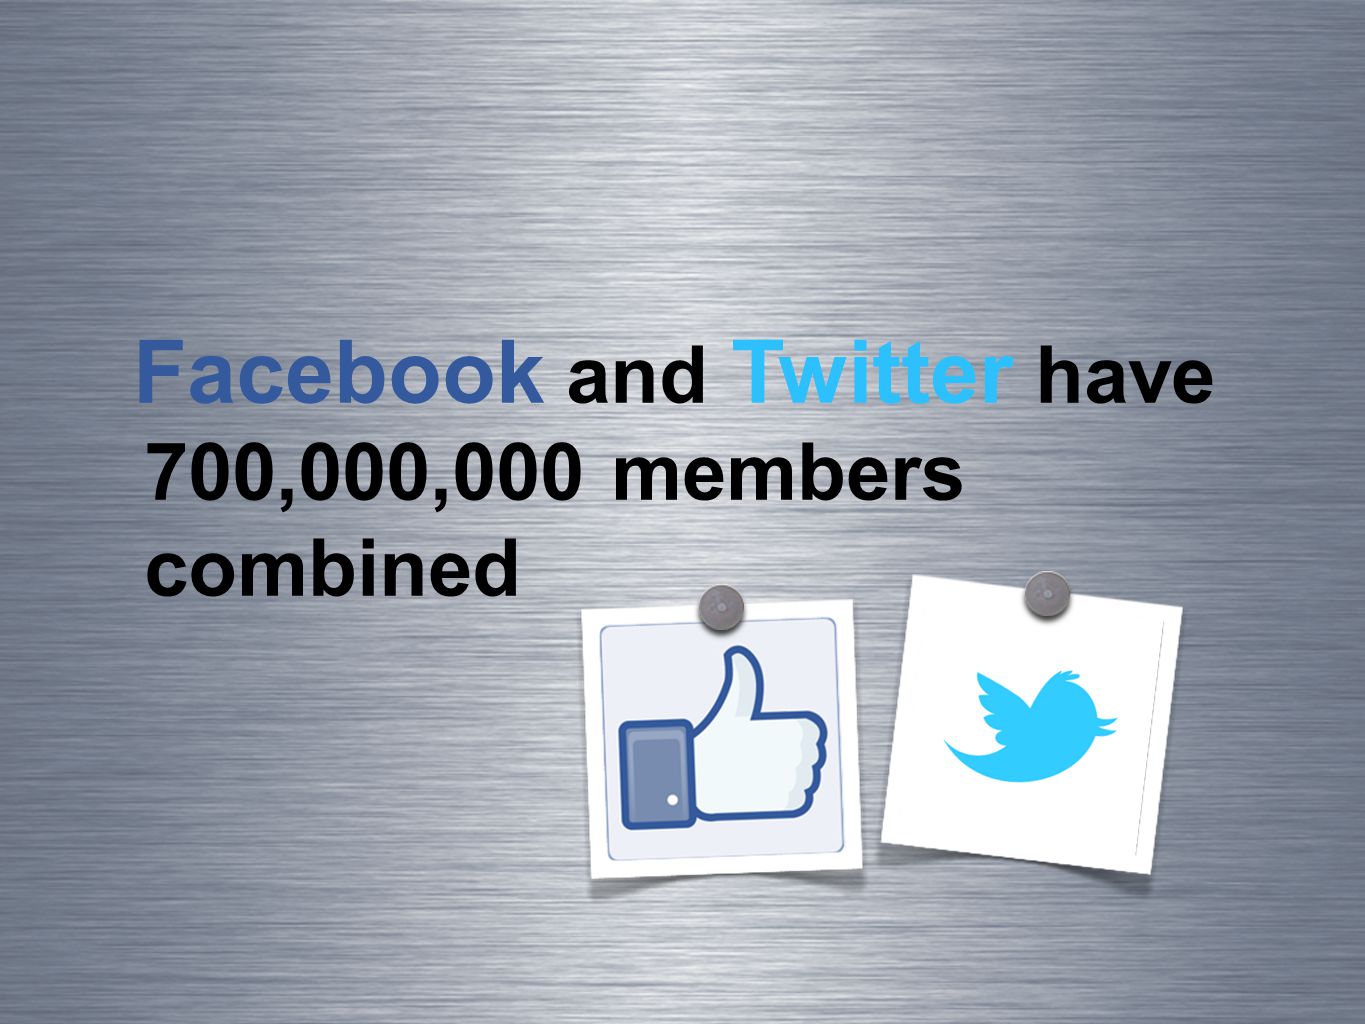 Facebook and Twitter have 700,000,000 members combined